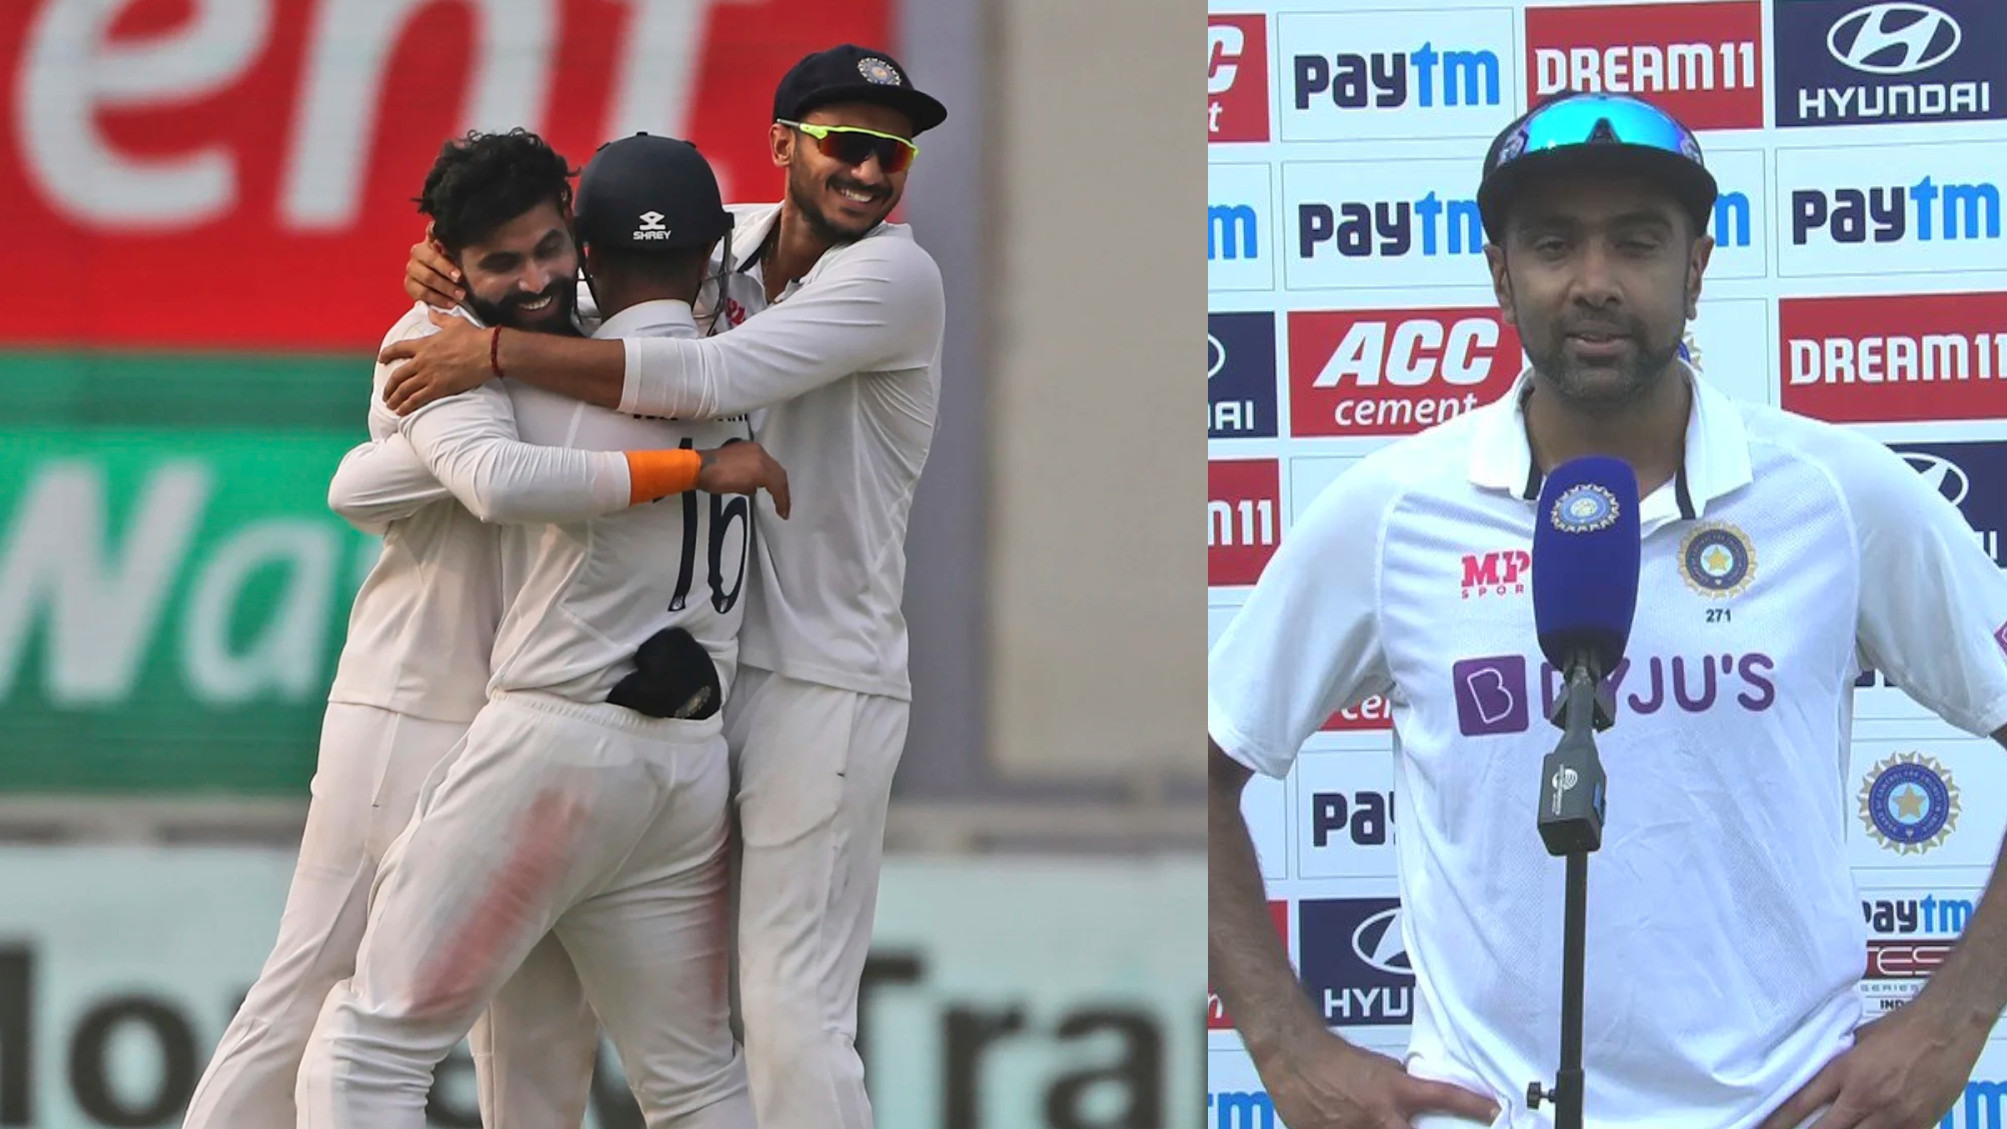 IND v NZ 2021: Couldn’t finish the job; knew bad light would play a role- R Ashwin after drawn 1st Test